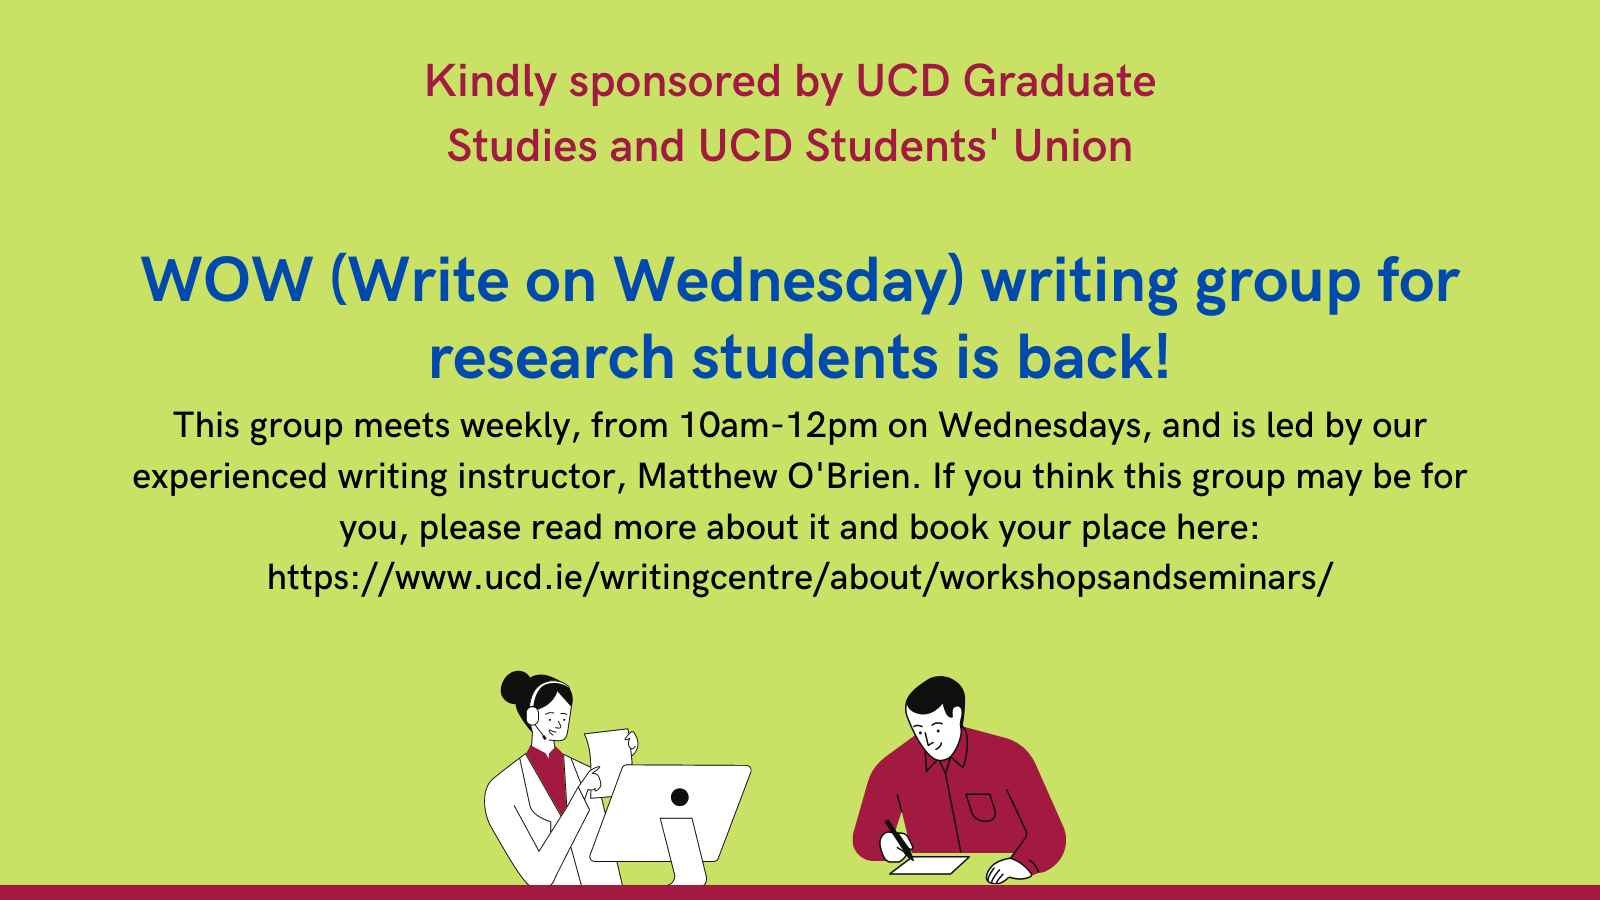 WOW (Write on Wednesday) writing group for research students is back!